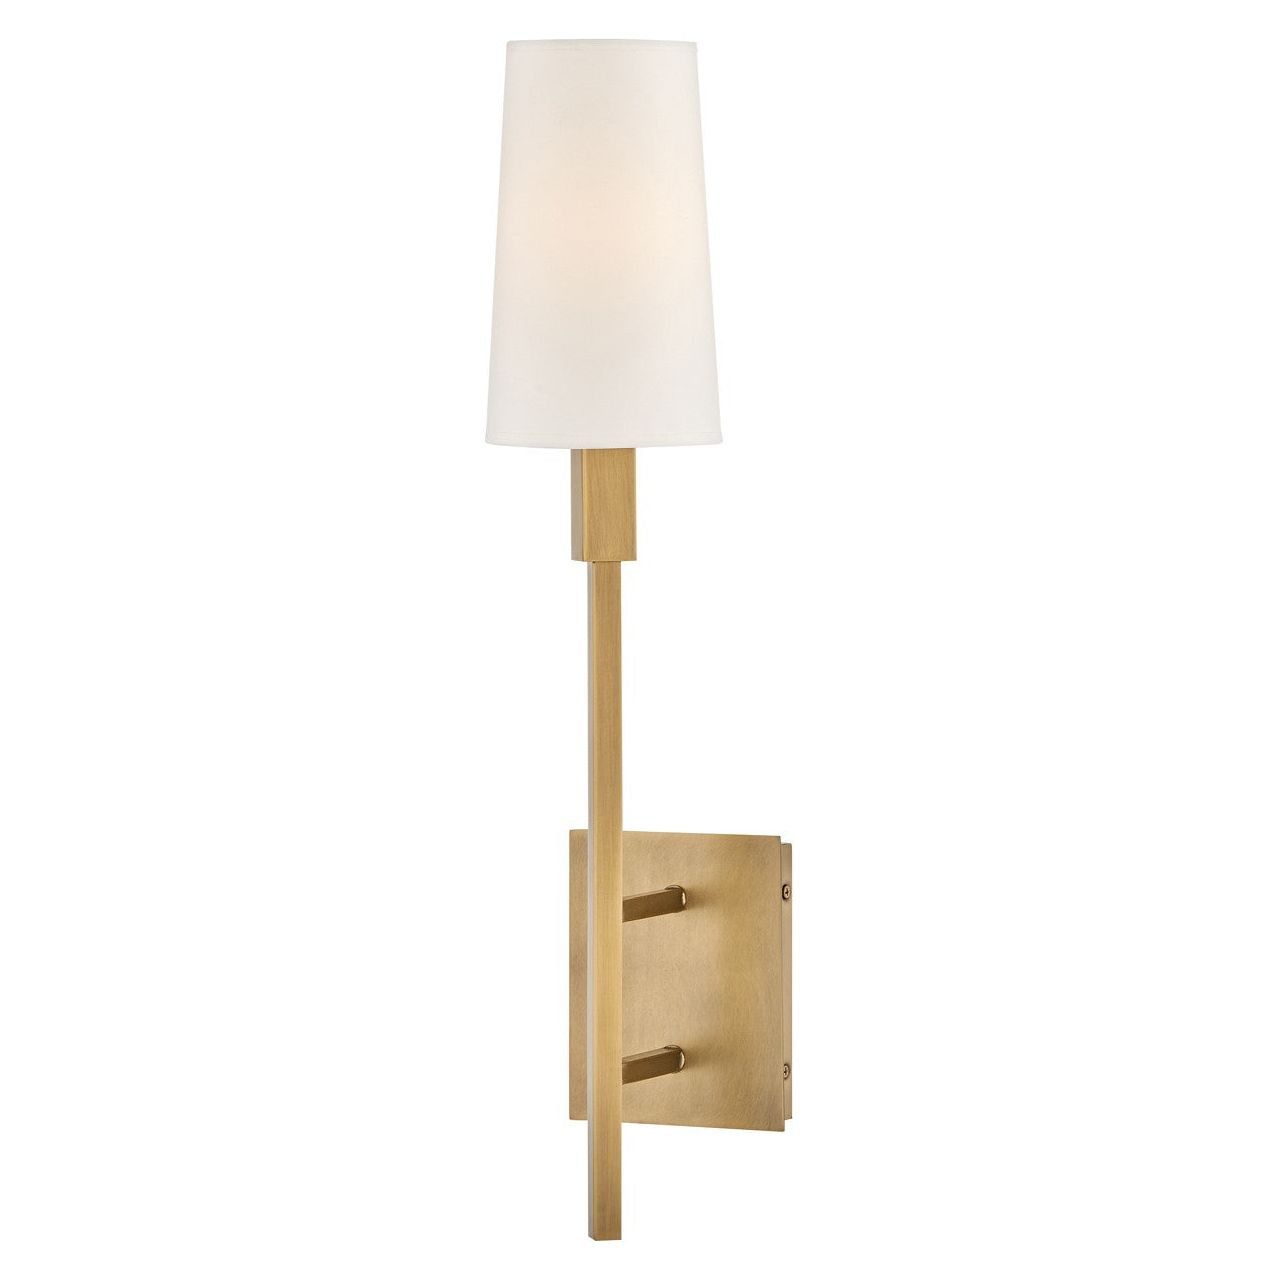 Hinkley Canada - 46450HB - LED Wall Sconce - Fenwick - Heritage Brass